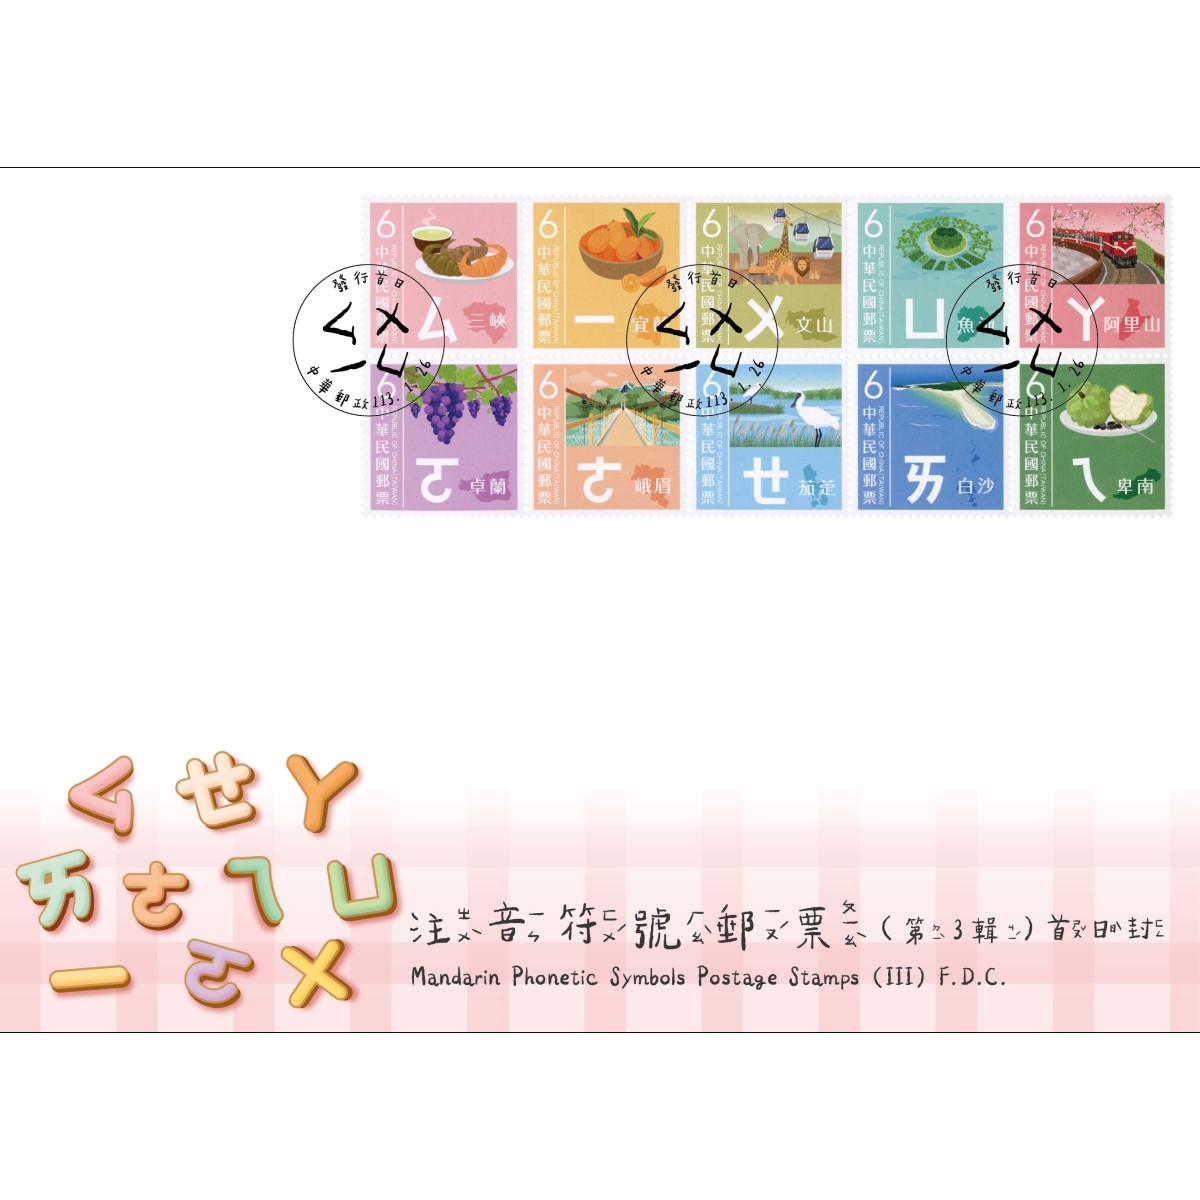 Mandarin Phonetic Symbols Postage Stamps (III) Pre-cancelled FDC affixed with a complete set of stamps